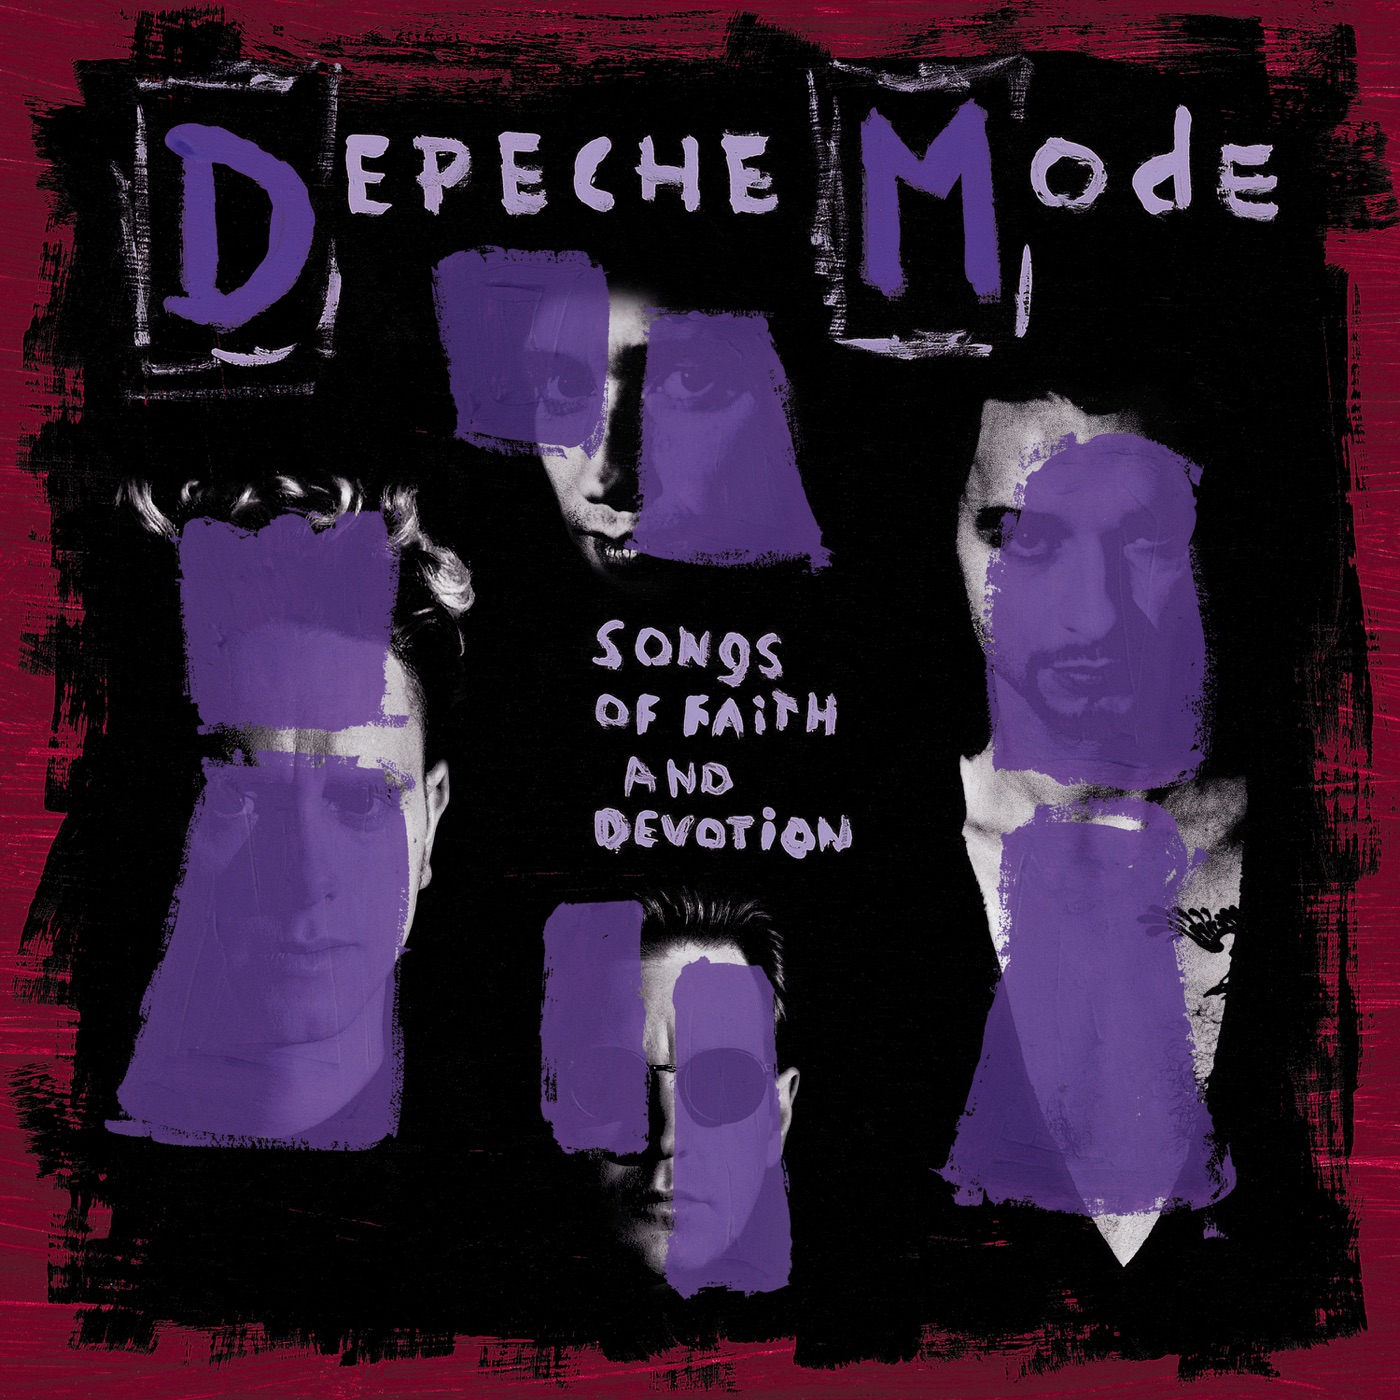 Songs of Faith and Devotion by Depeche Mode, Songs of Faith and Devotion (Deluxe)